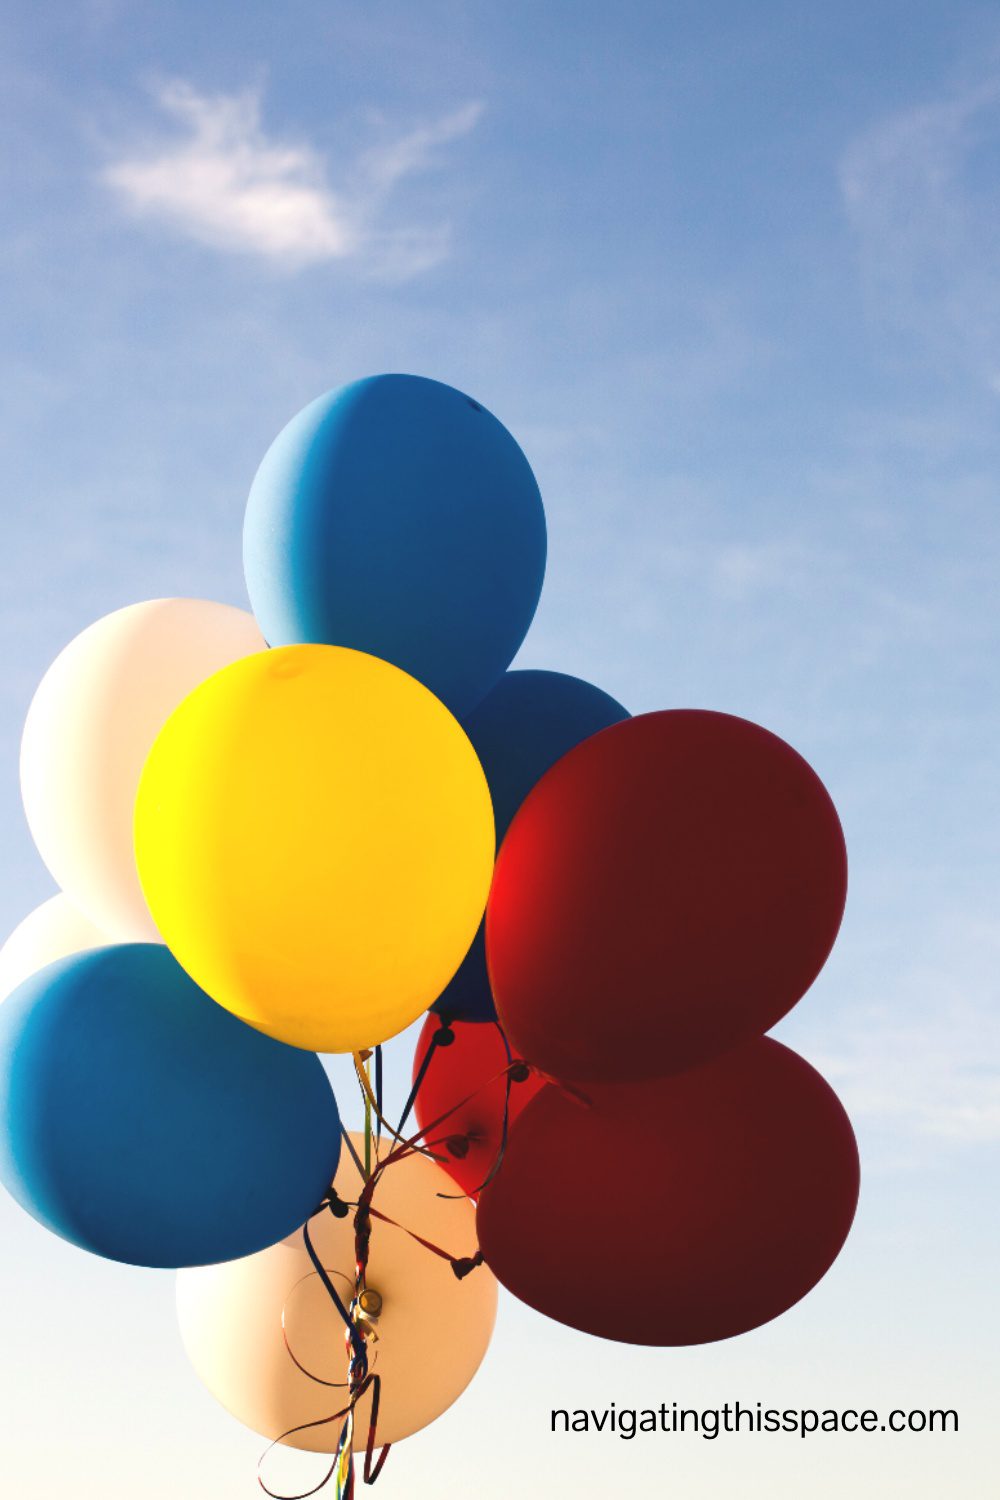 red, yellow, blue, and white balloons in the sky